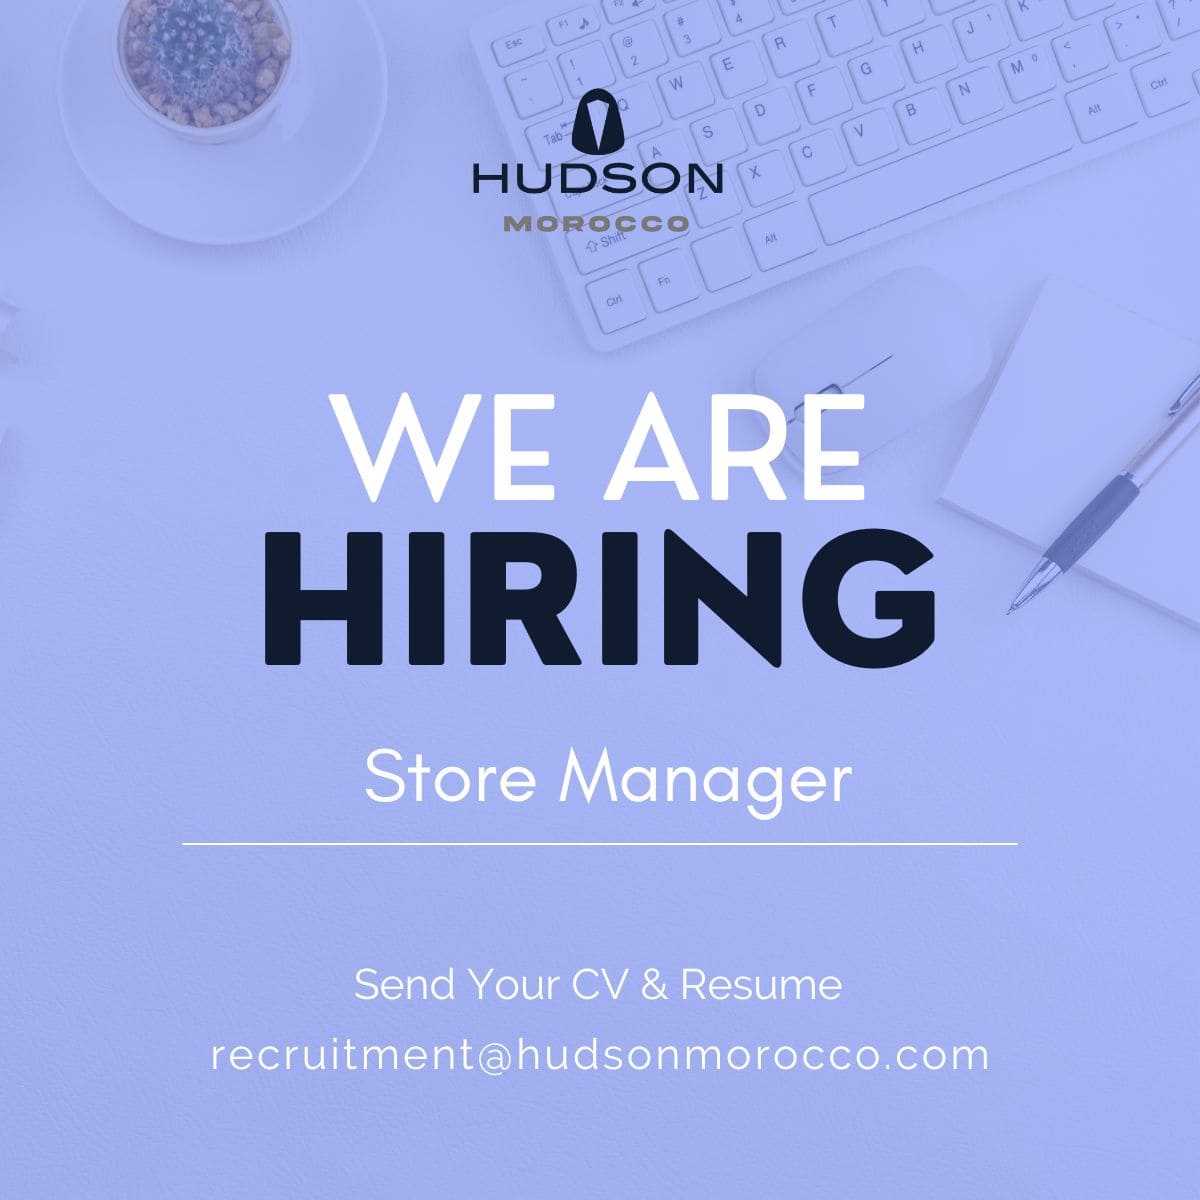 Hudson Morocco recrute des Store Managers